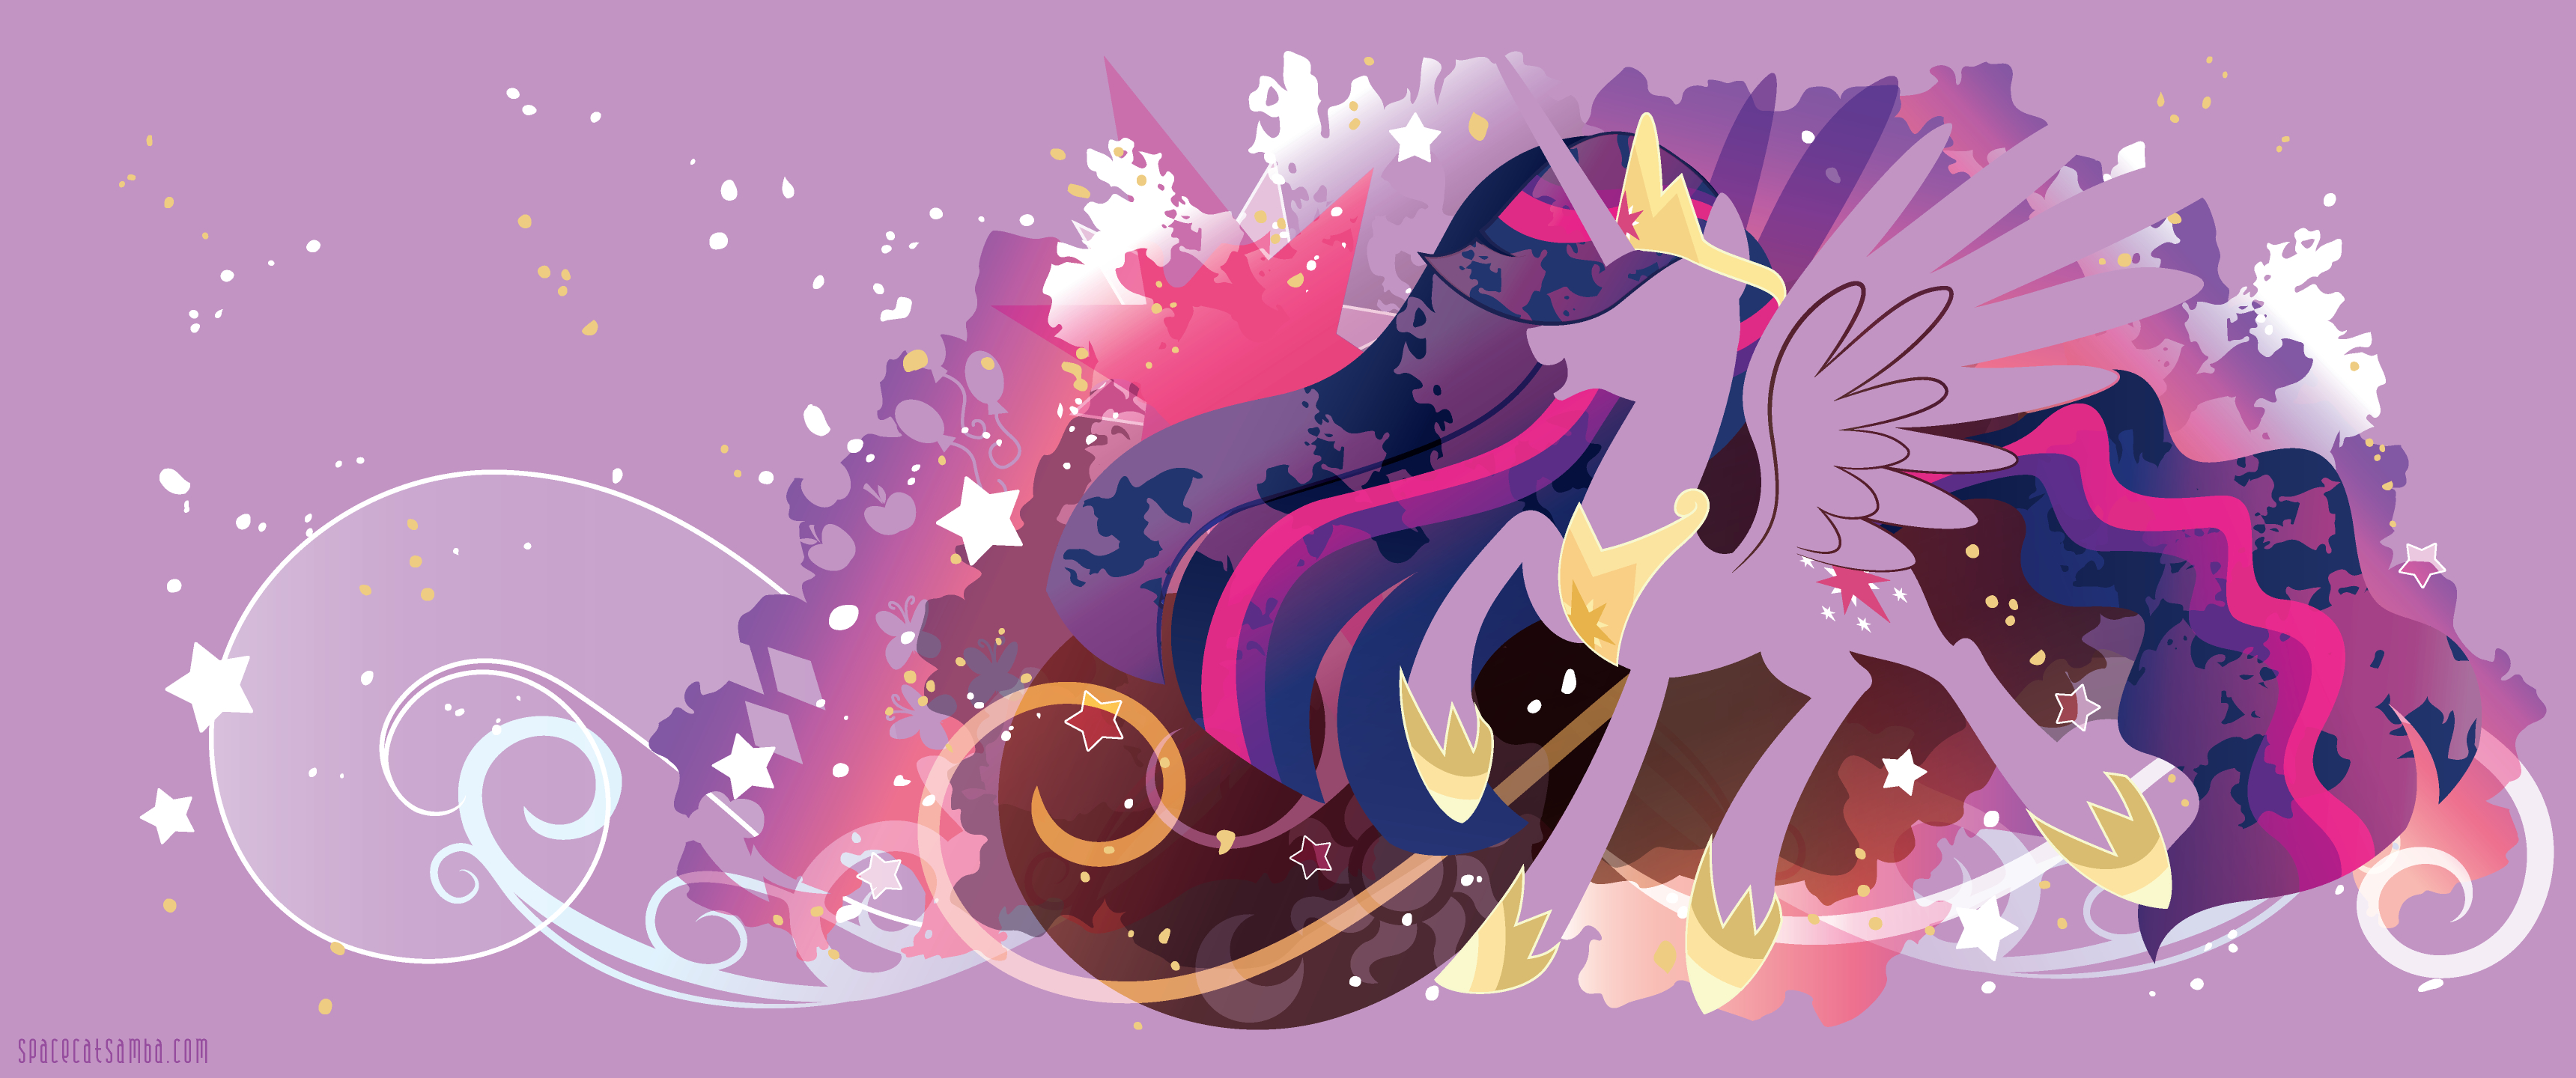 3440x1440 310+ Twilight Sparkle HD Wallpapers and Backgrounds